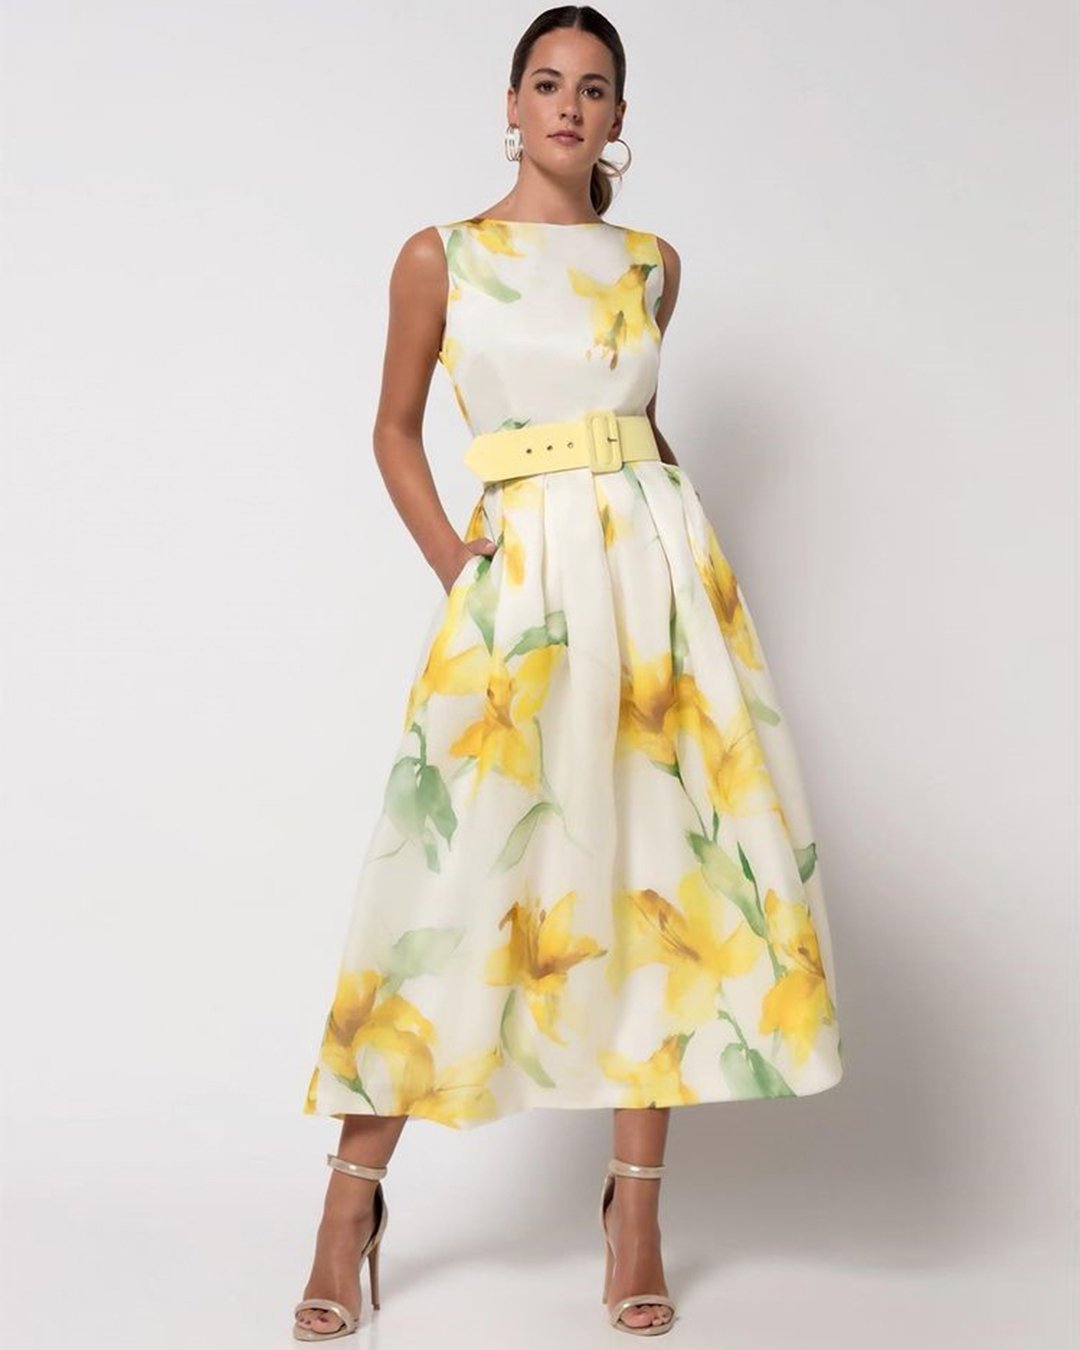 mother of the bride dresses yellow floral print spring idea matildecano